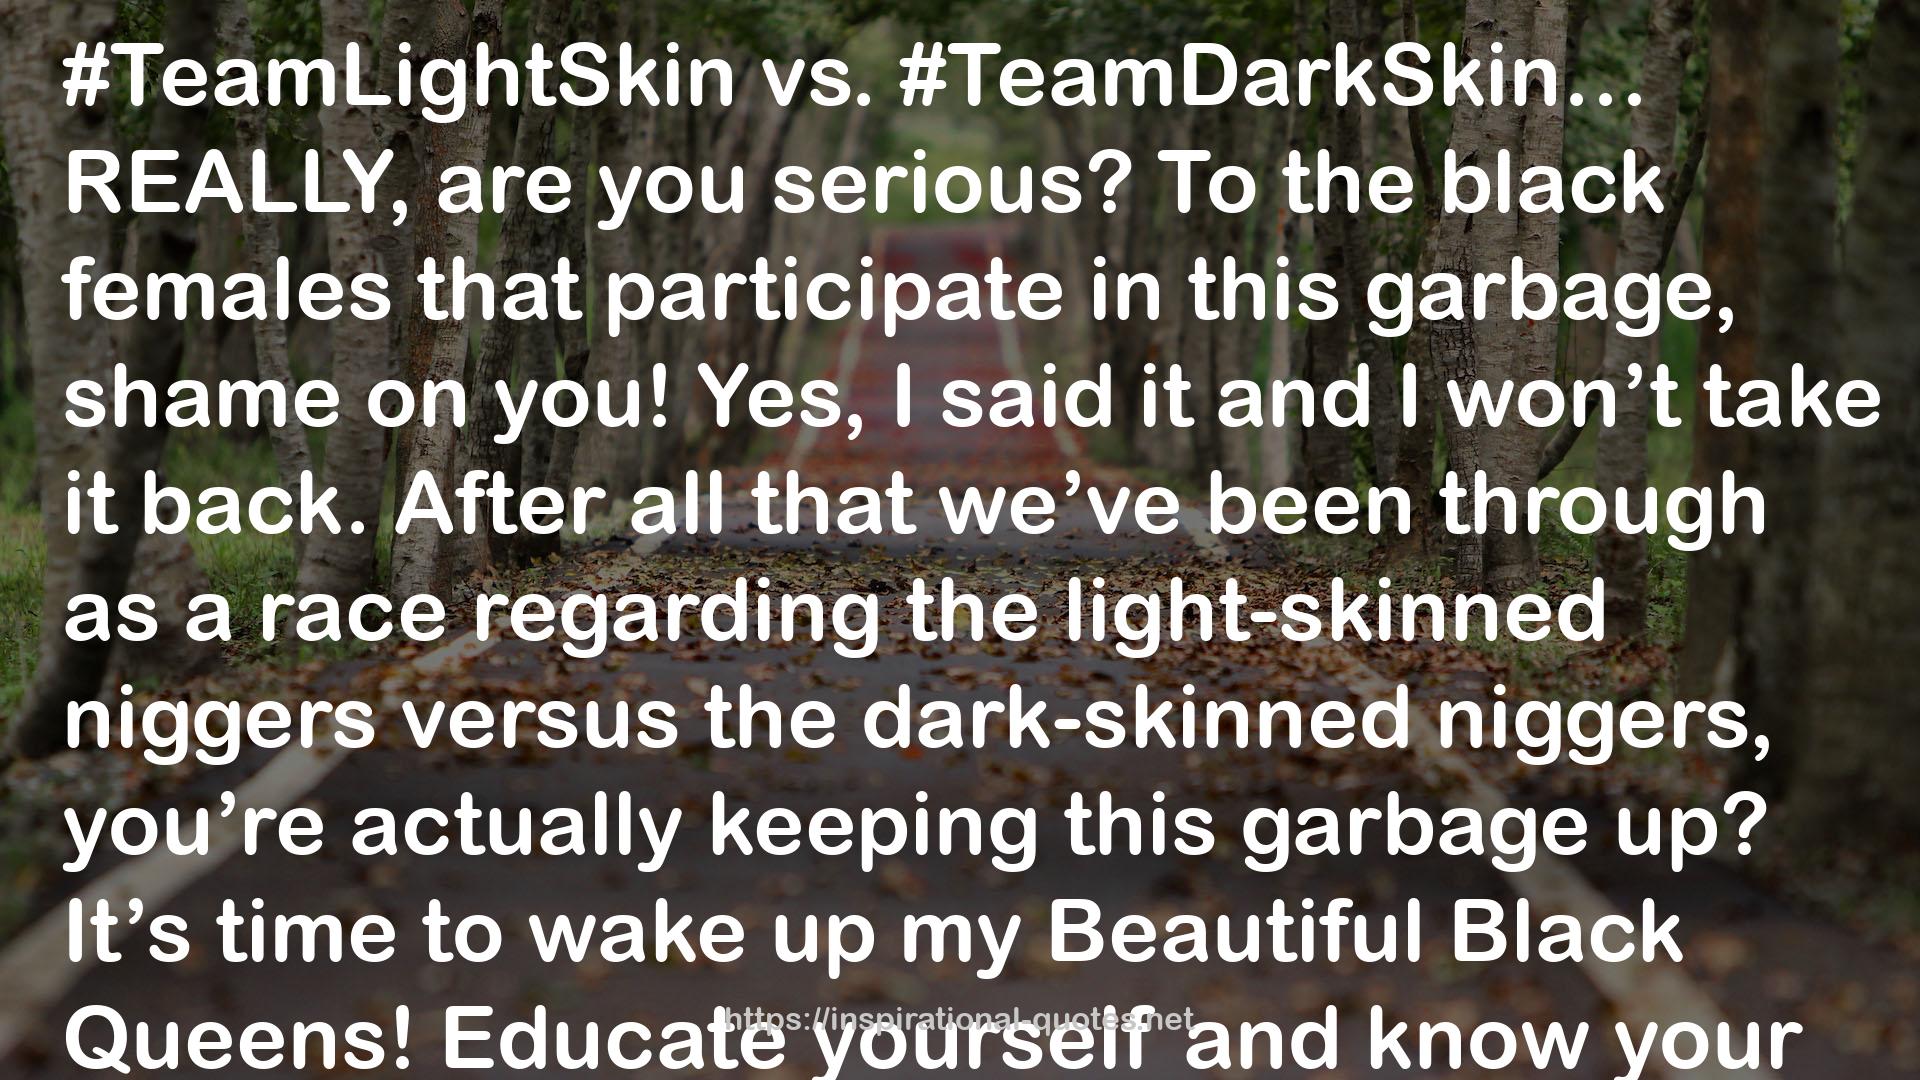 Stephanie Lahart quote : #TeamLightSkin vs. #TeamDarkSkin… REALLY, are you serious? To the black females that participate in this garbage, shame on you! Yes, I said it and I won’t take it back. After all that we’ve been through as a race regarding the light-skinned niggers versus the dark-skinned niggers, you’re actually keeping this garbage up? It’s time to wake up my Beautiful Black Queens! Educate yourself and know your history. This shouldn’t be something that we’re entertaining. WE are #TeamMelanin! Period. Enough of the foolishness! Respect yourself. Respect our race. We should be building one another up, not tearing each other down. Melanin is Exquisite Beauty in EVERY shade. Together, WE are strong, unstoppable, and powerful. Enough is enough! I encourage you to stop participating in things that keep us divided. Real Talk!